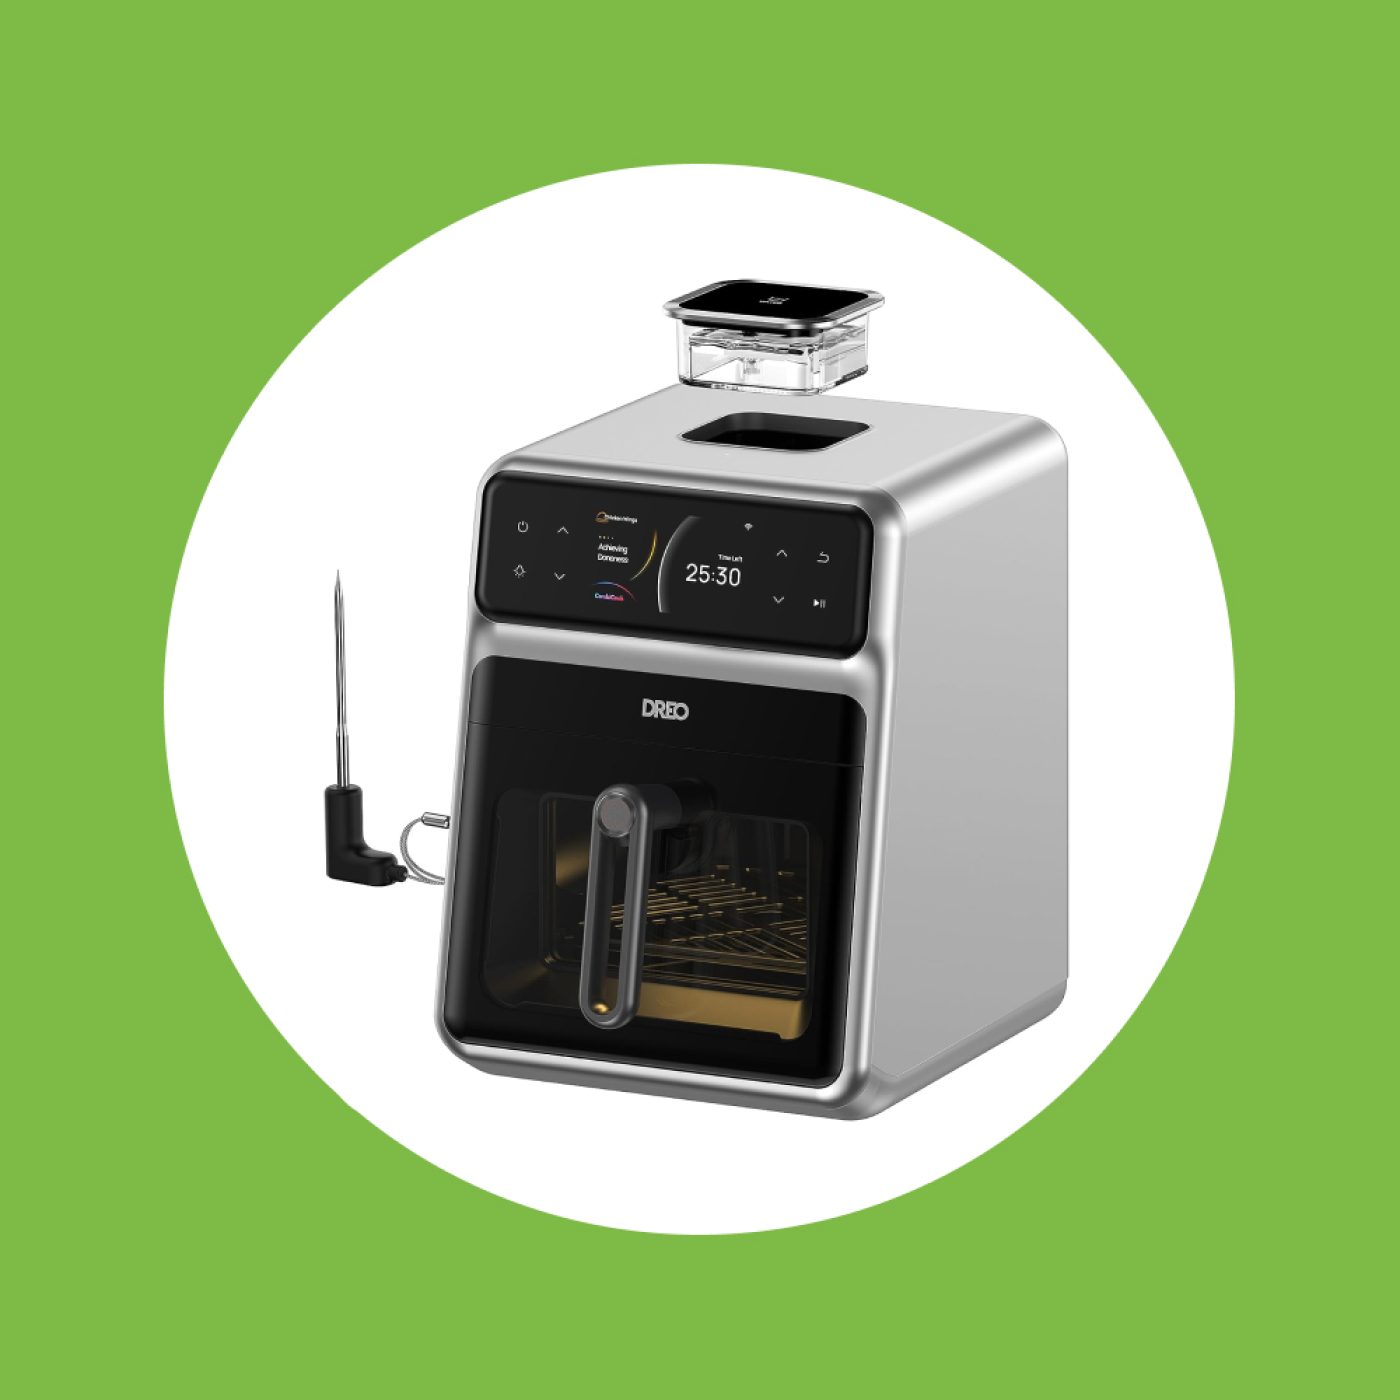 Dreo ChefMaker Deals: All time low price of $259 on sale this week